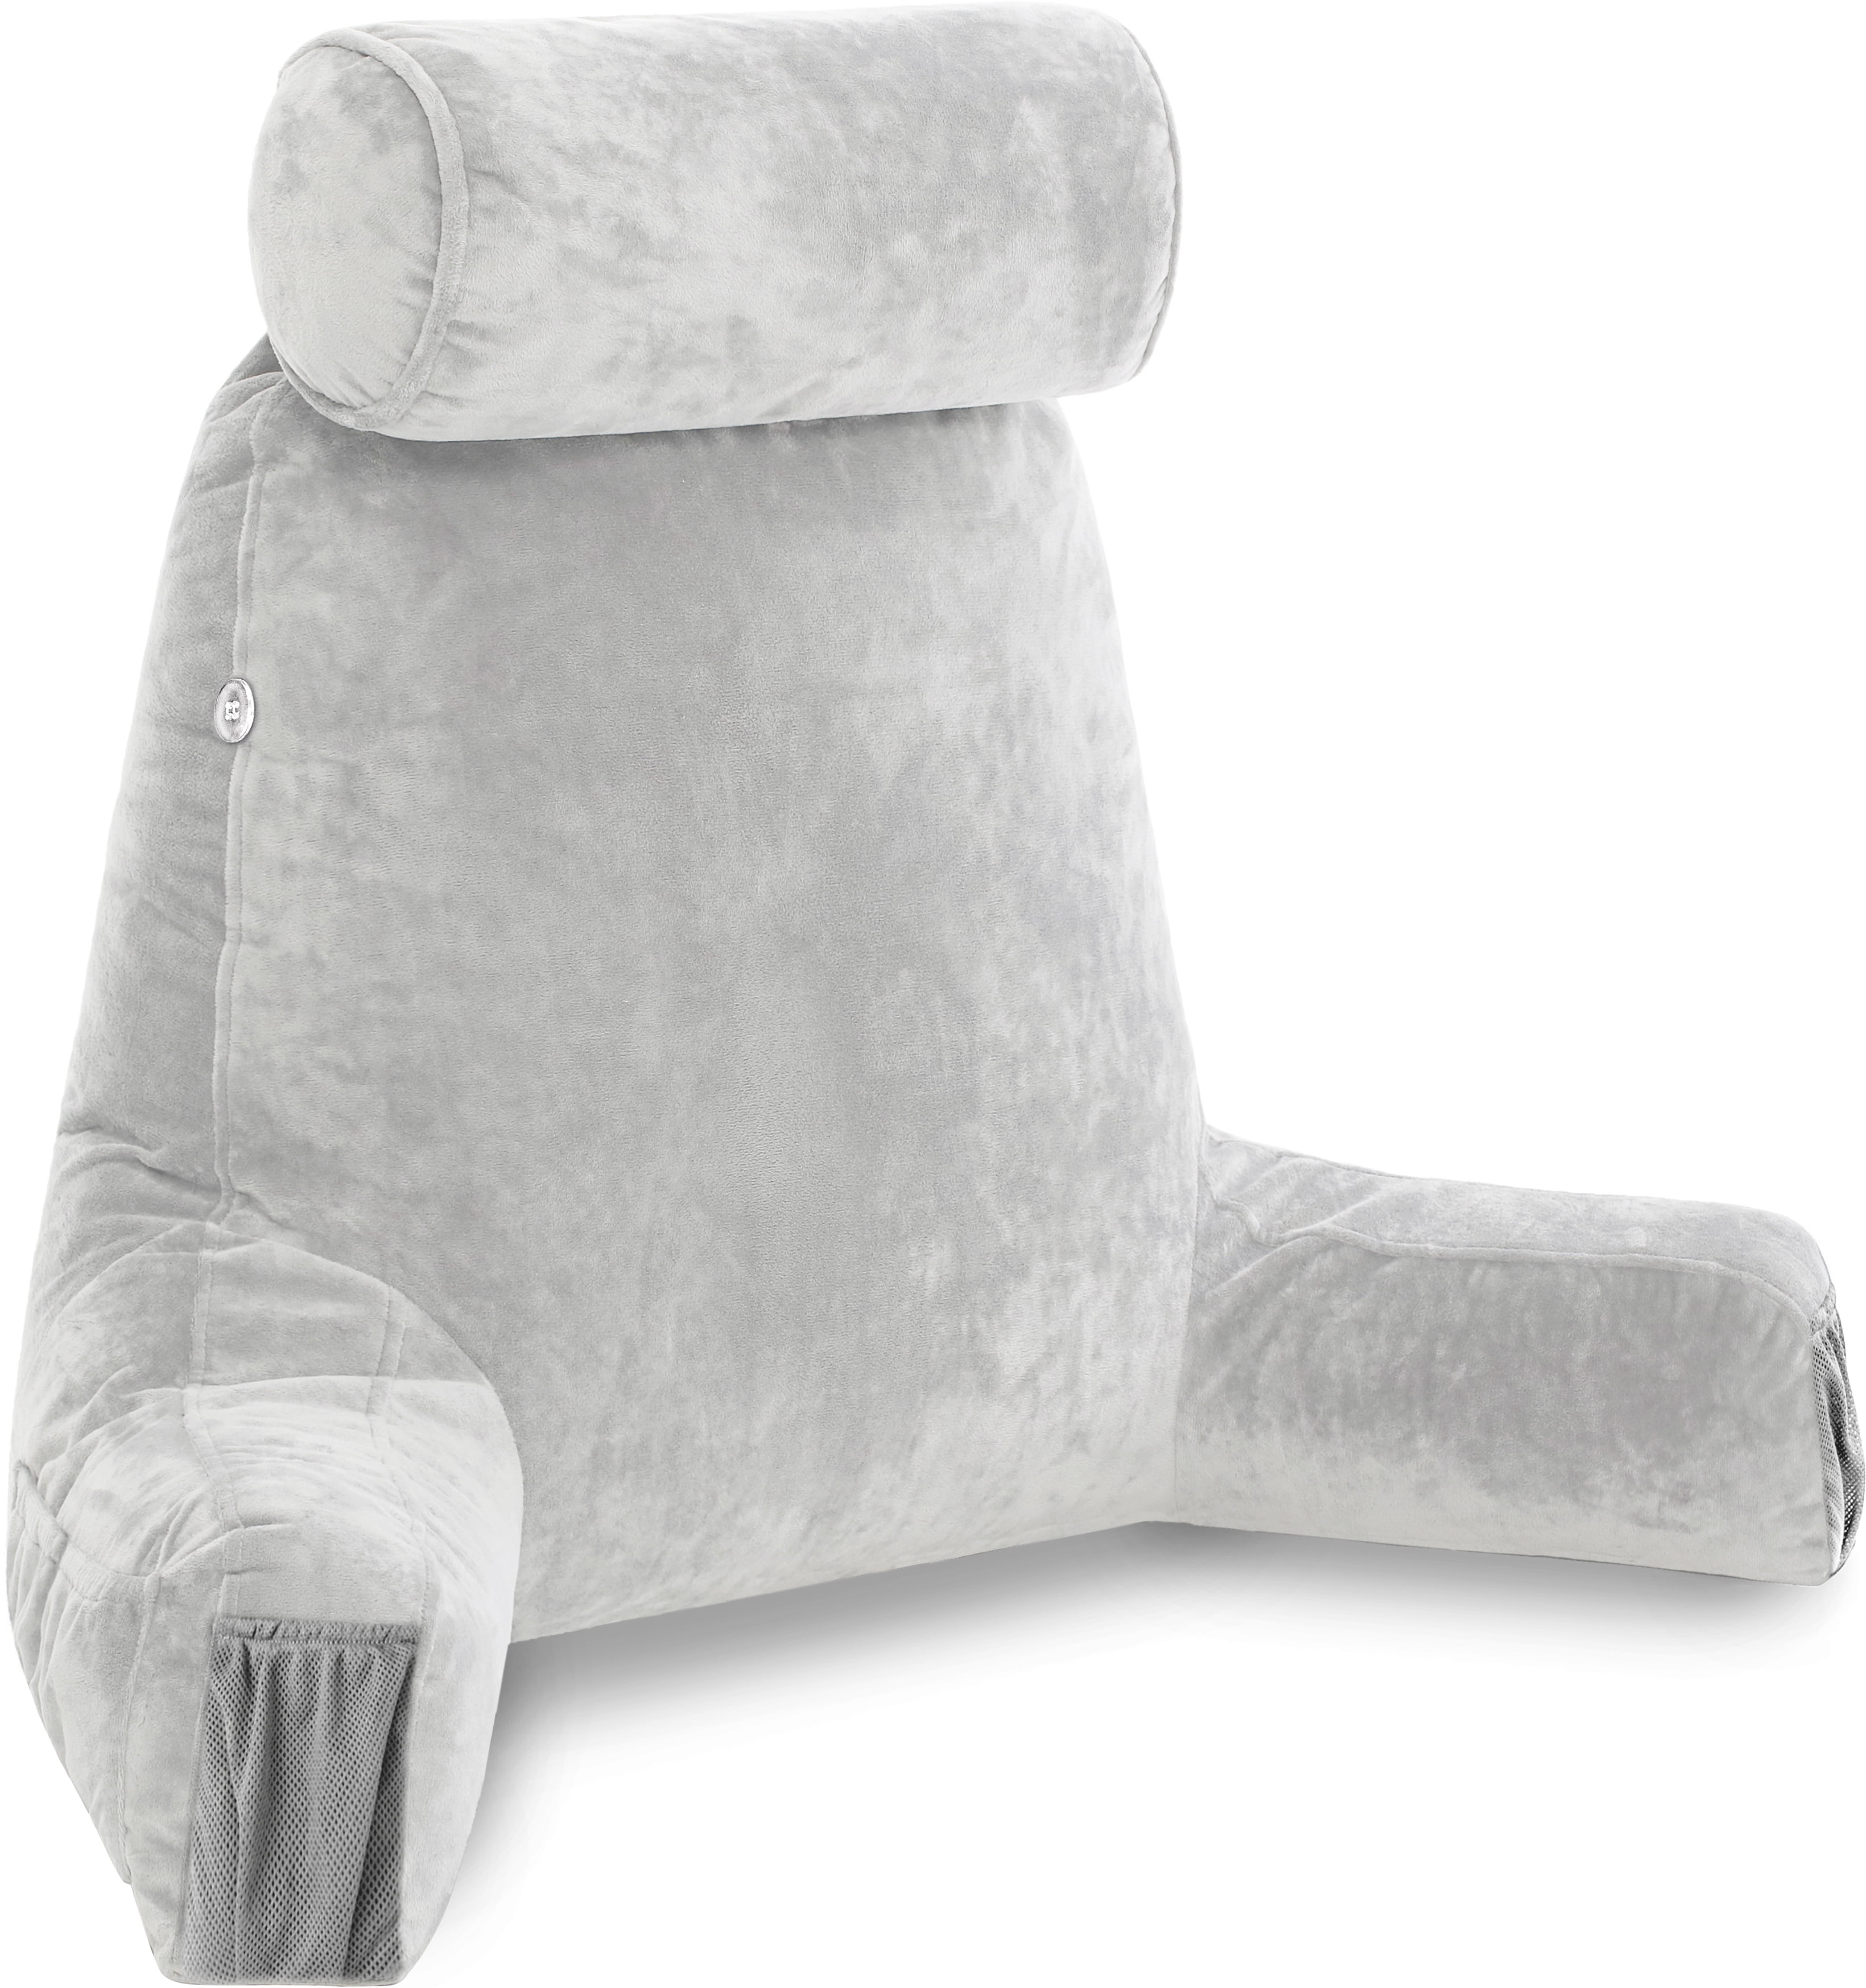 Joyching Backrest Reading Pillows for Sitting in Bed Adults - Plush Pillow  with Shredded Memory Foam Arm Rests Supportive Neck Pillow for Reading or